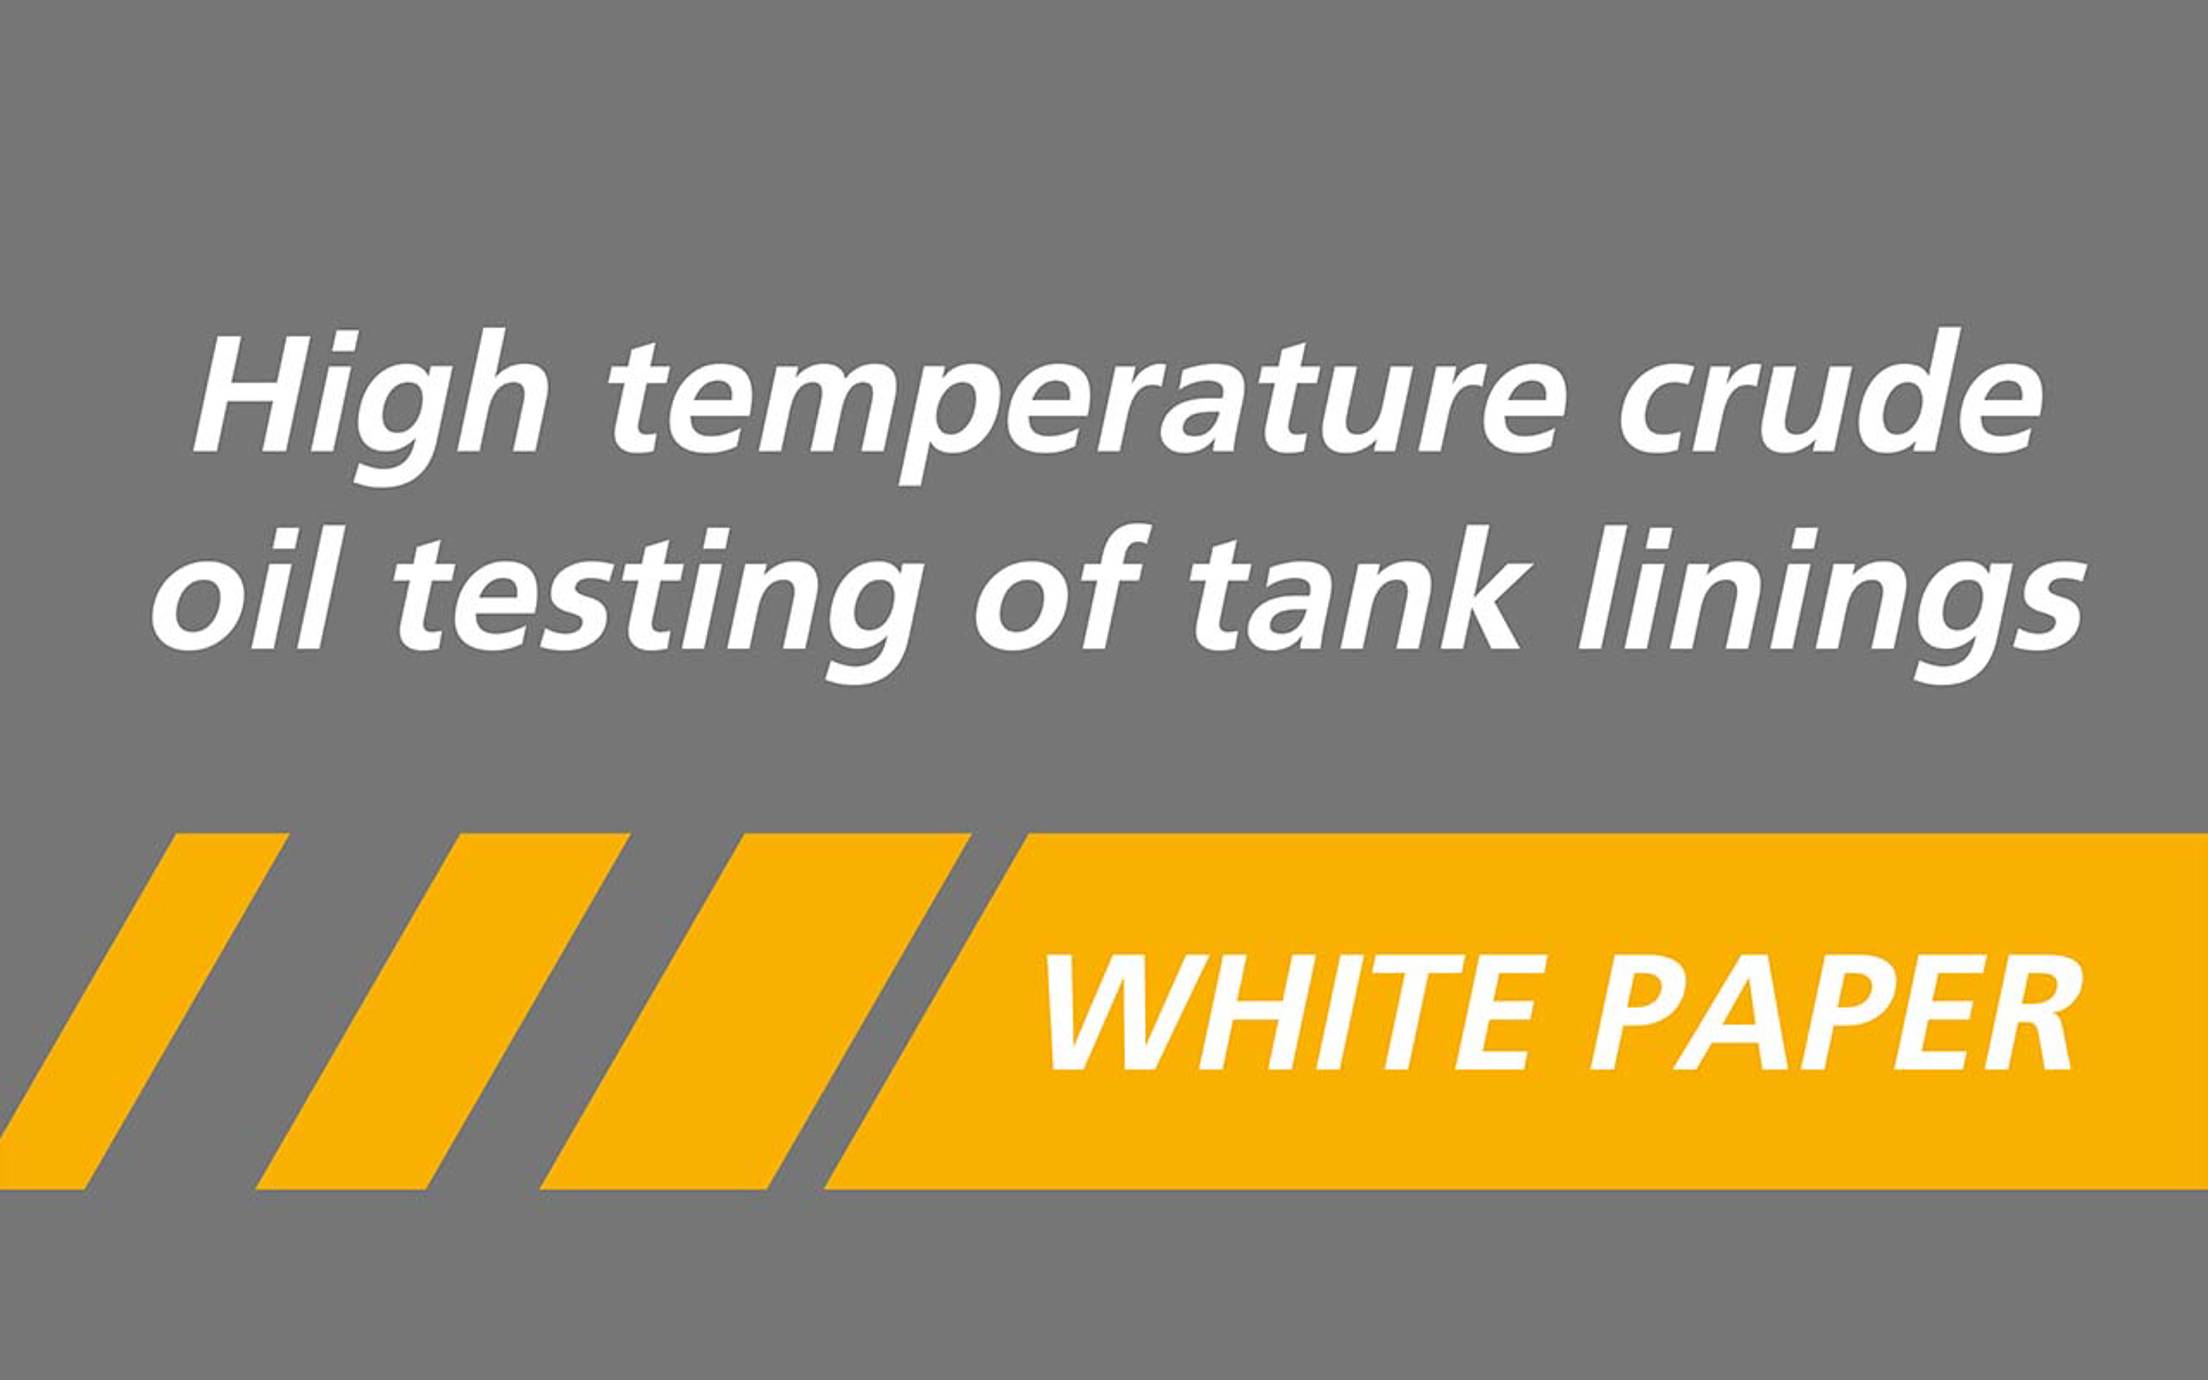 Image showing title of Jotun's white paper called High temperature crude oil testing of tank linings